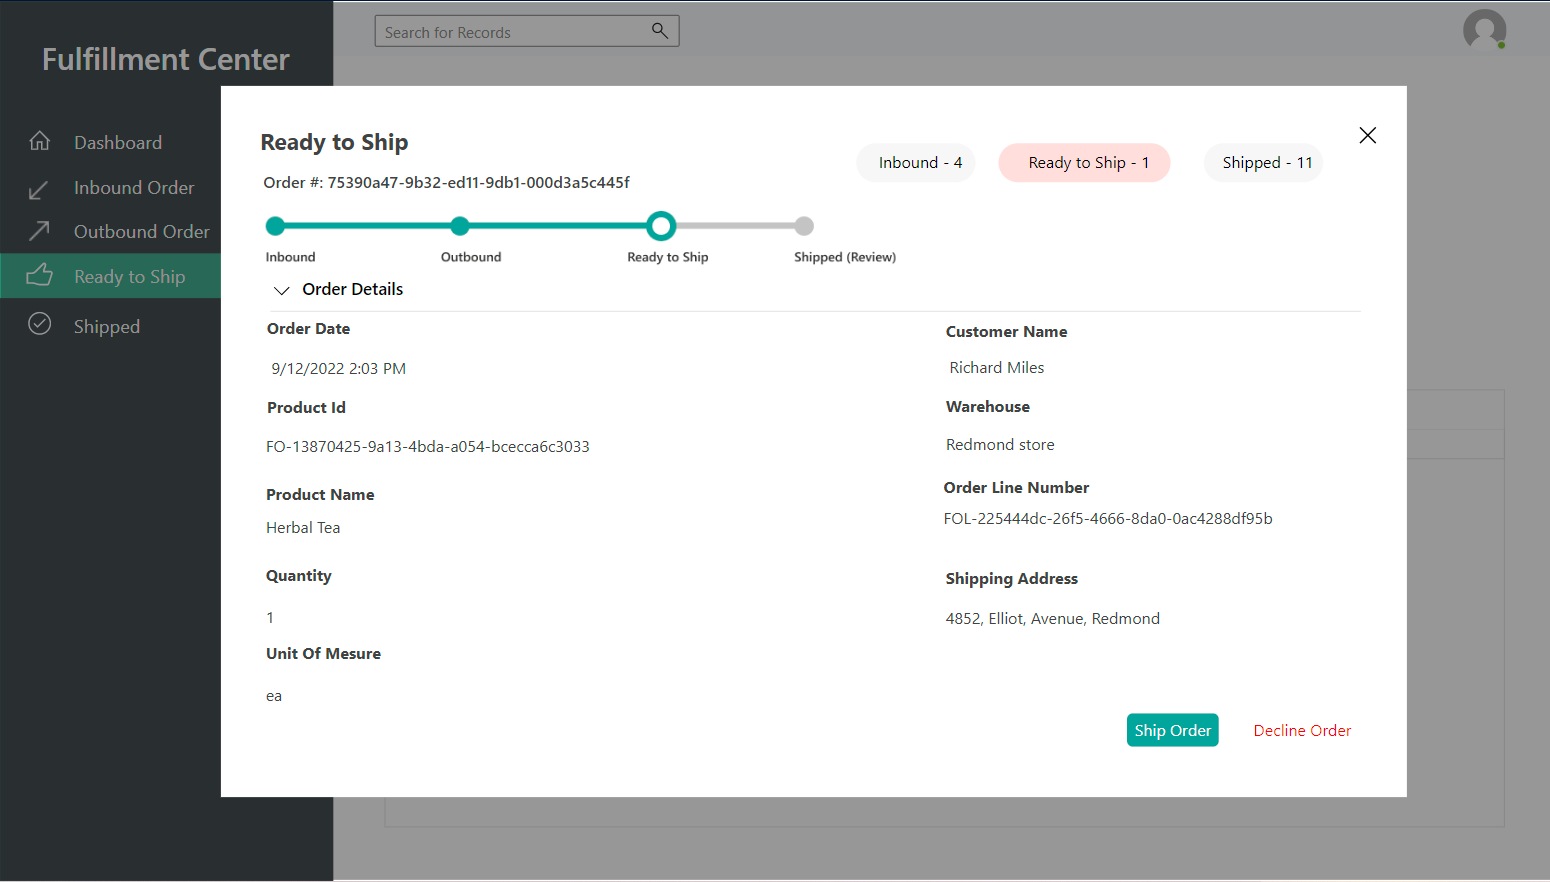 Ready to Ship page in the demo fulfillment app.